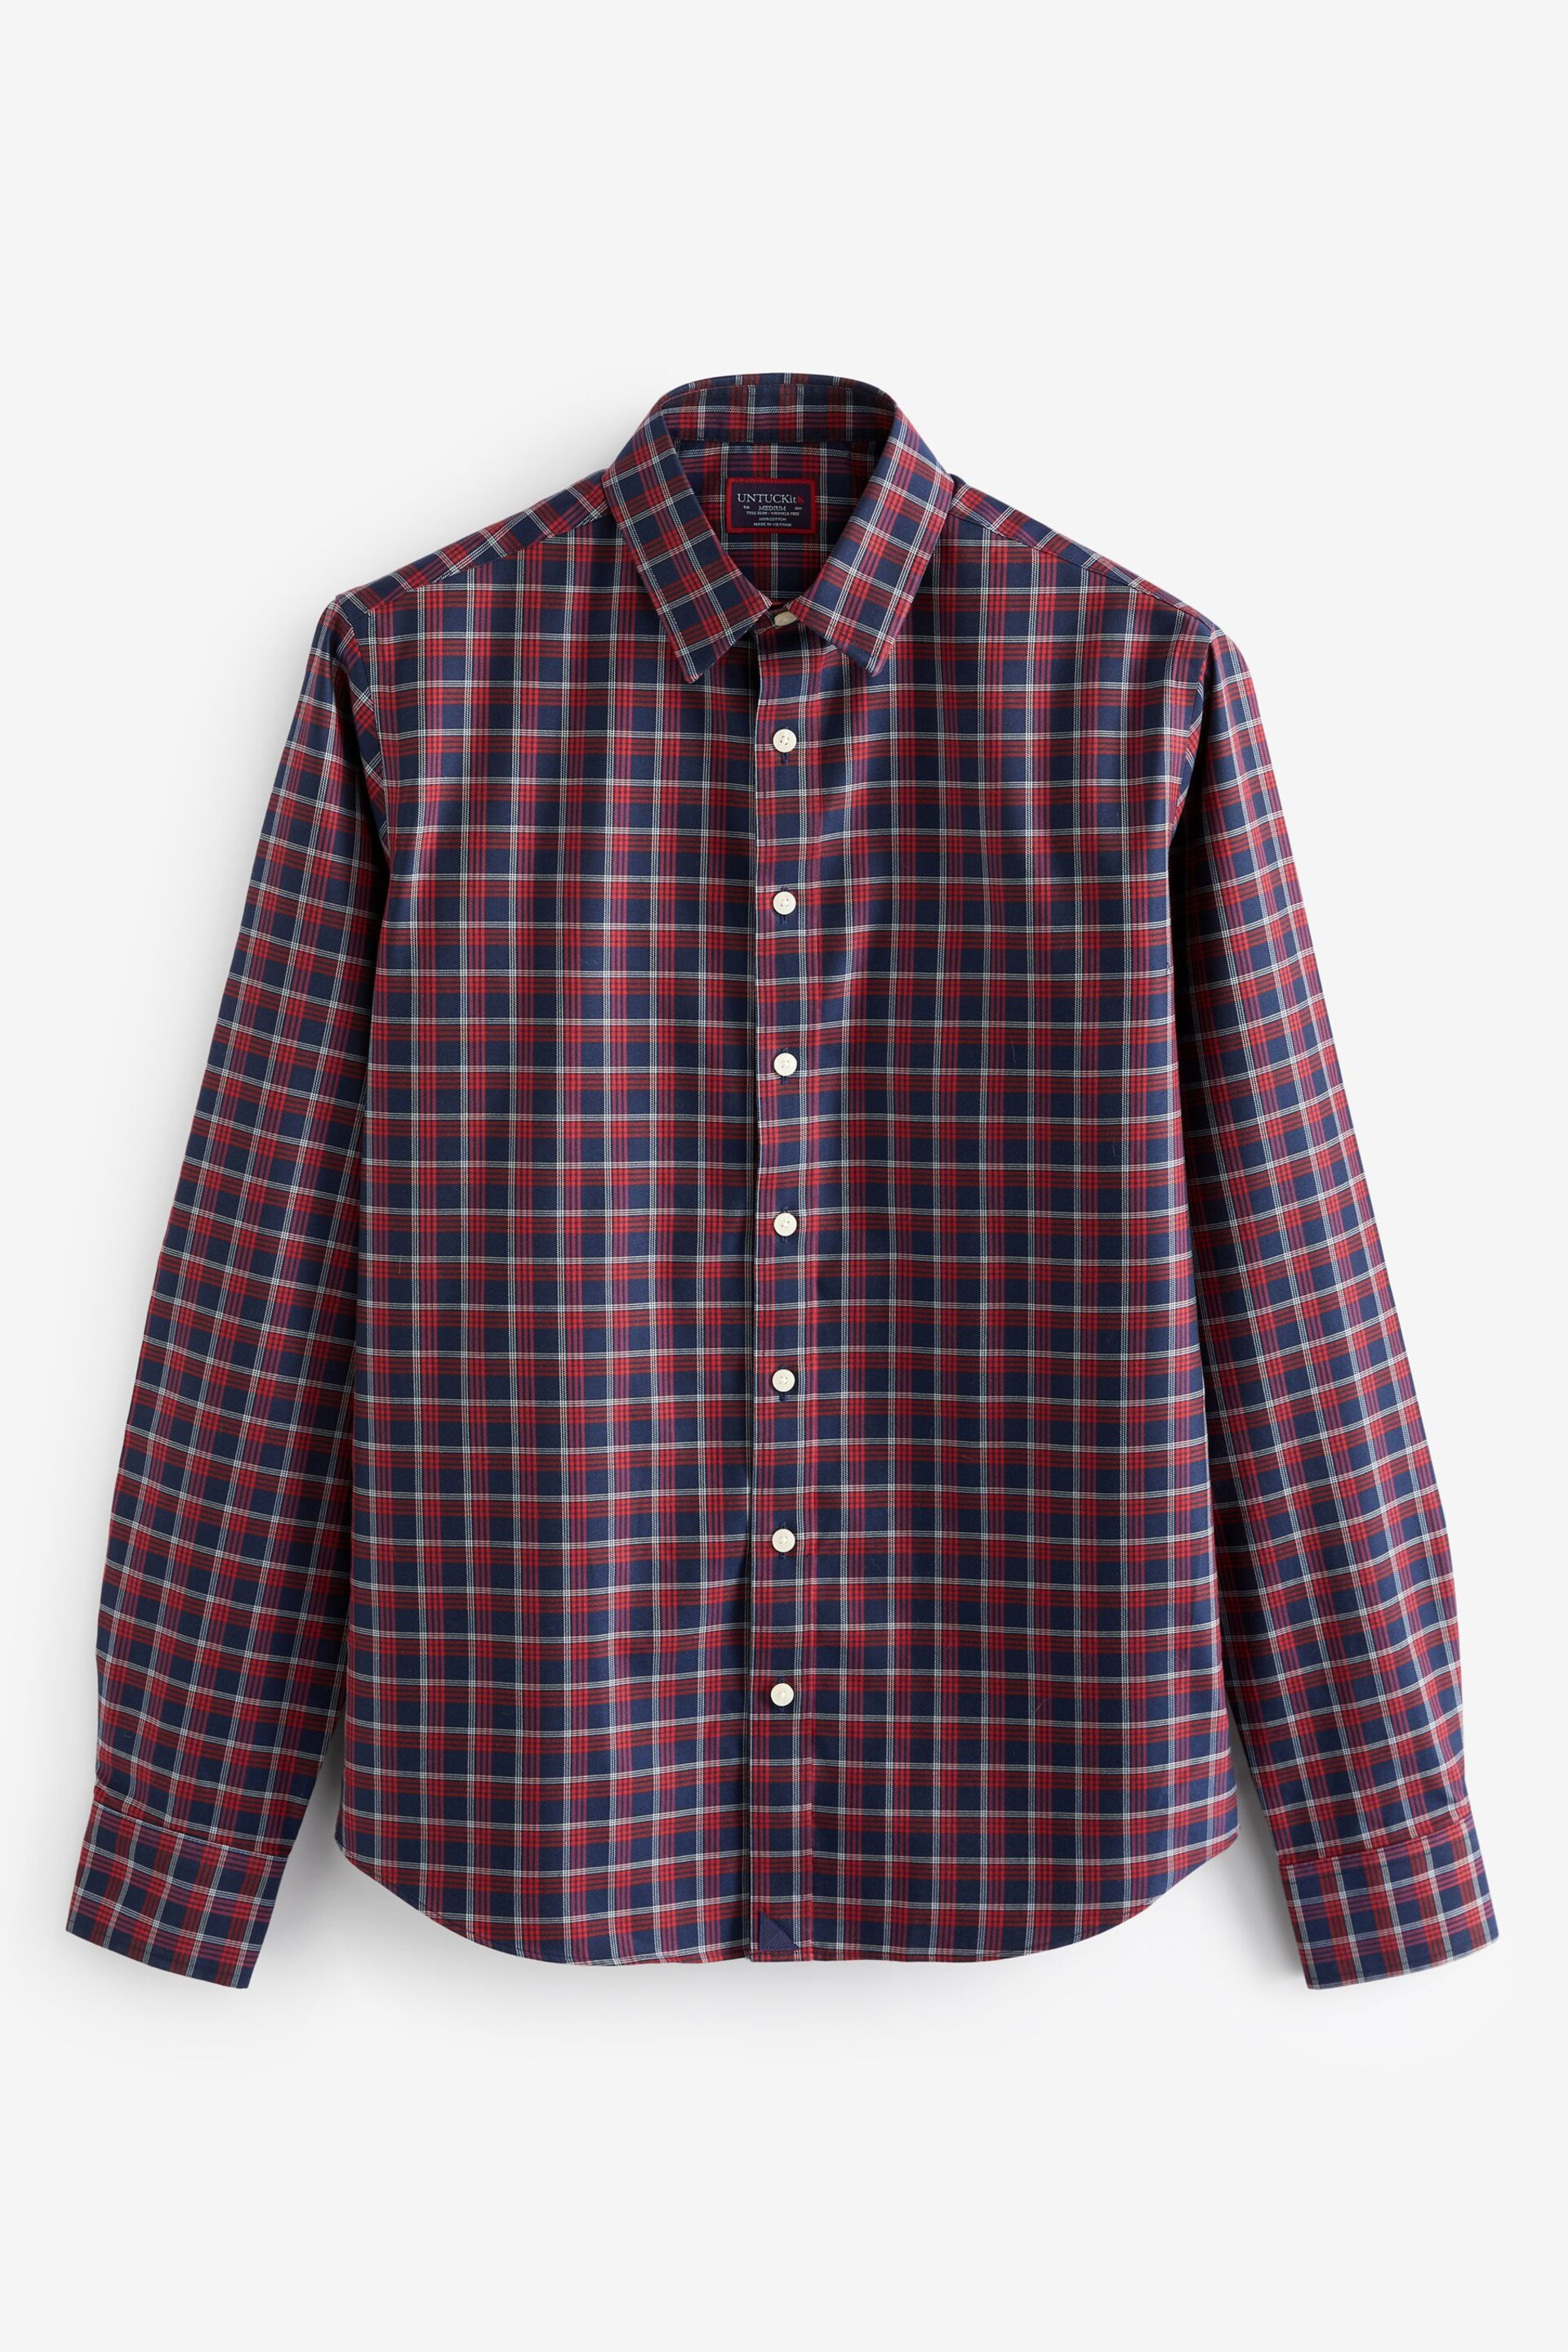 UNTUCKit Red/Blue Wrinkle-Free Slim Fit Cheny Shirt - Image 5 of 6